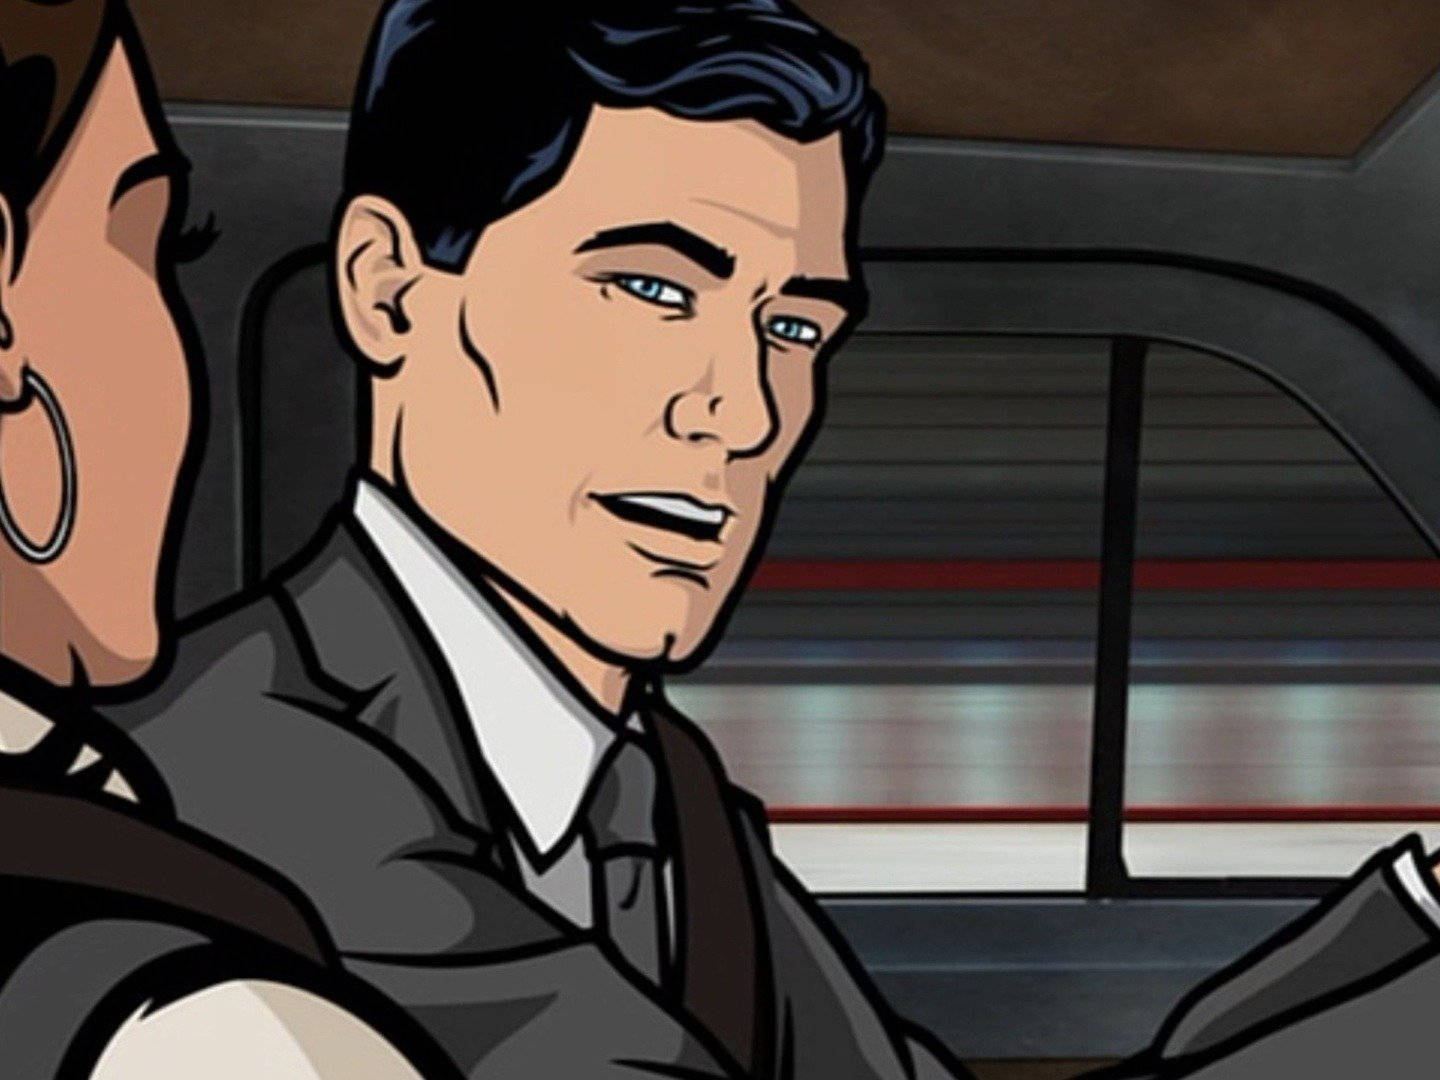 Sterling Archer in action, thrilling car chase. Wallpaper